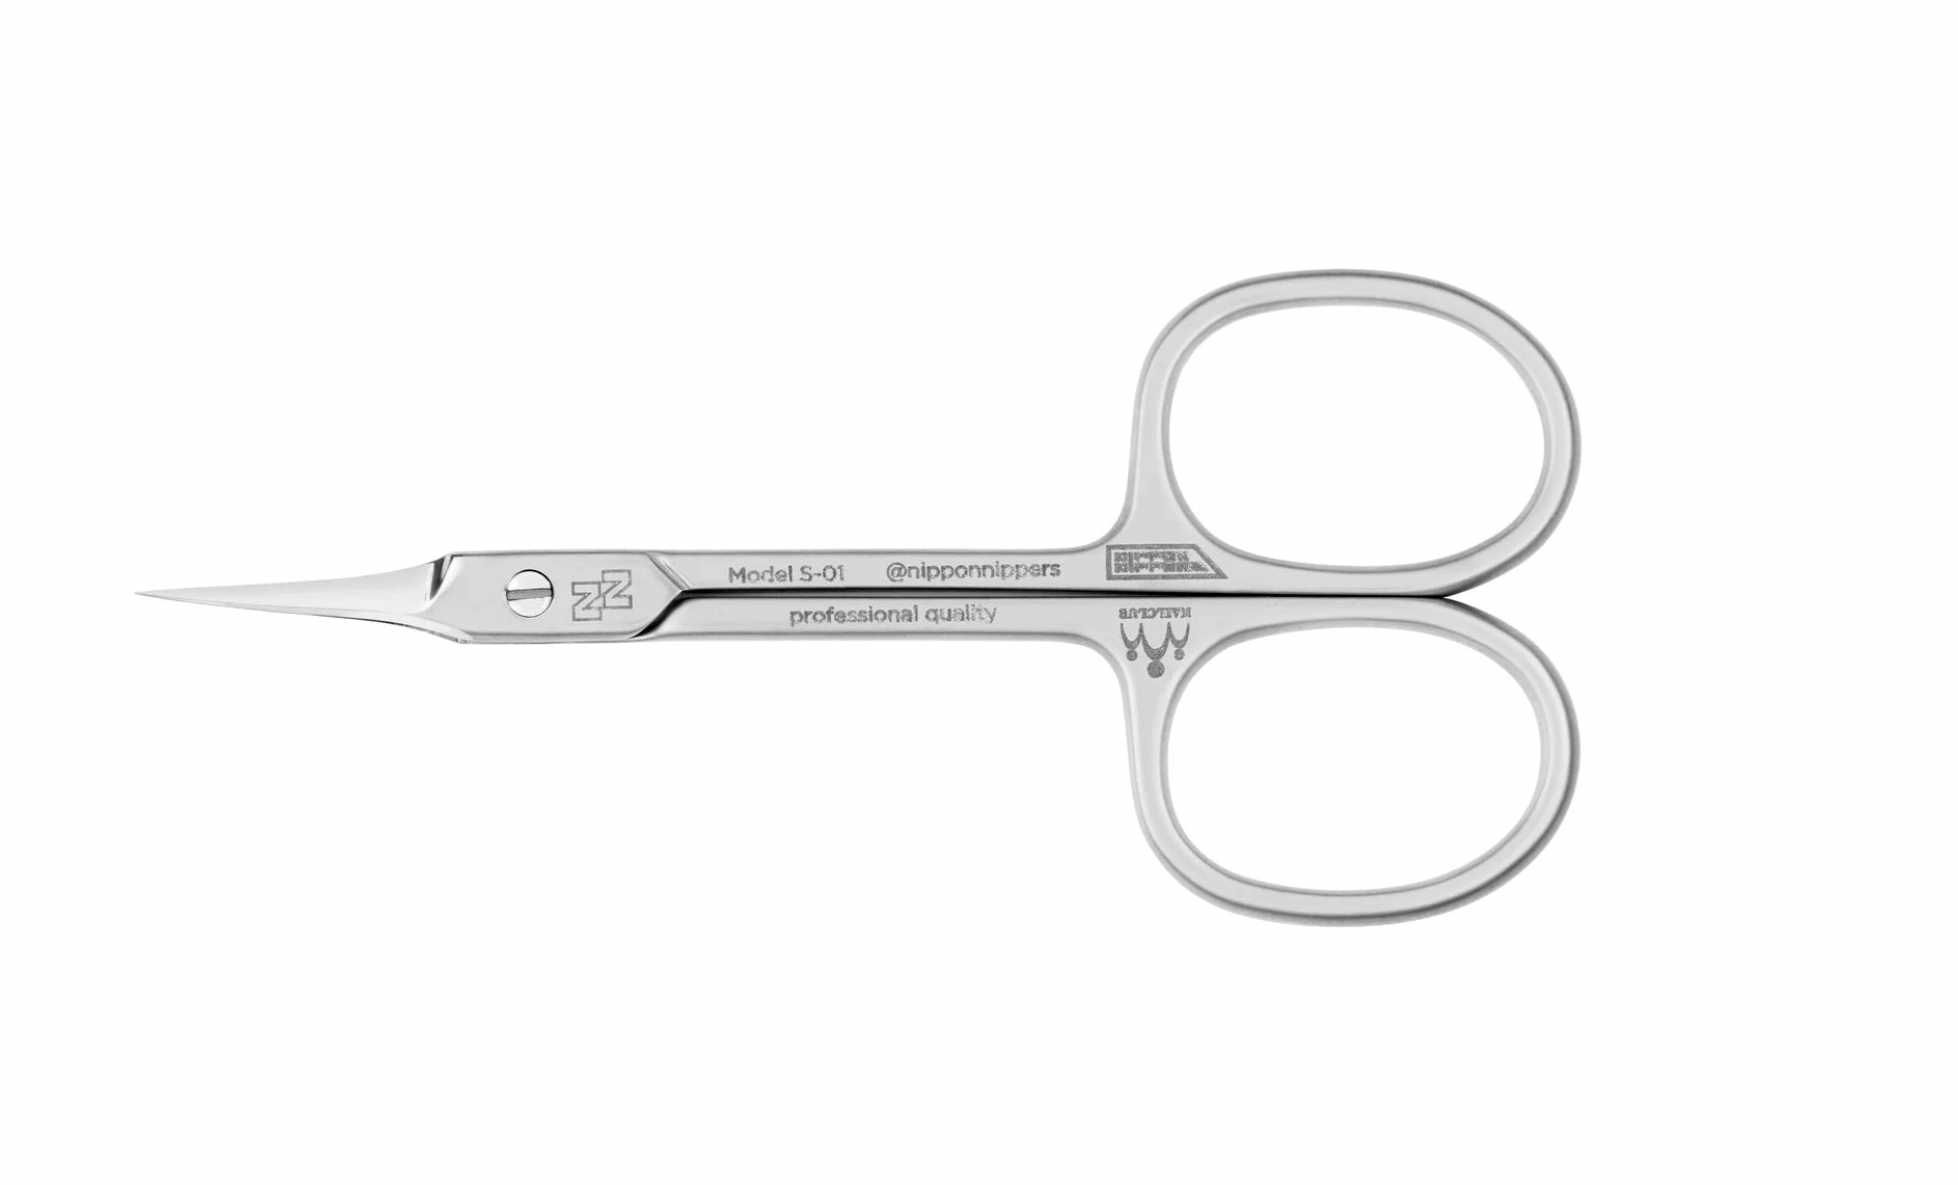  FOMIYES 1pc Leather Scissors Silicone Nail Tools Cuticle  Trimmer Manicure Tools Professional Household Tools Nail Skin Clippers  Cuticle Cutter Pro Tools Pedicure Silica Gel Nail Scissors : Beauty &  Personal Care